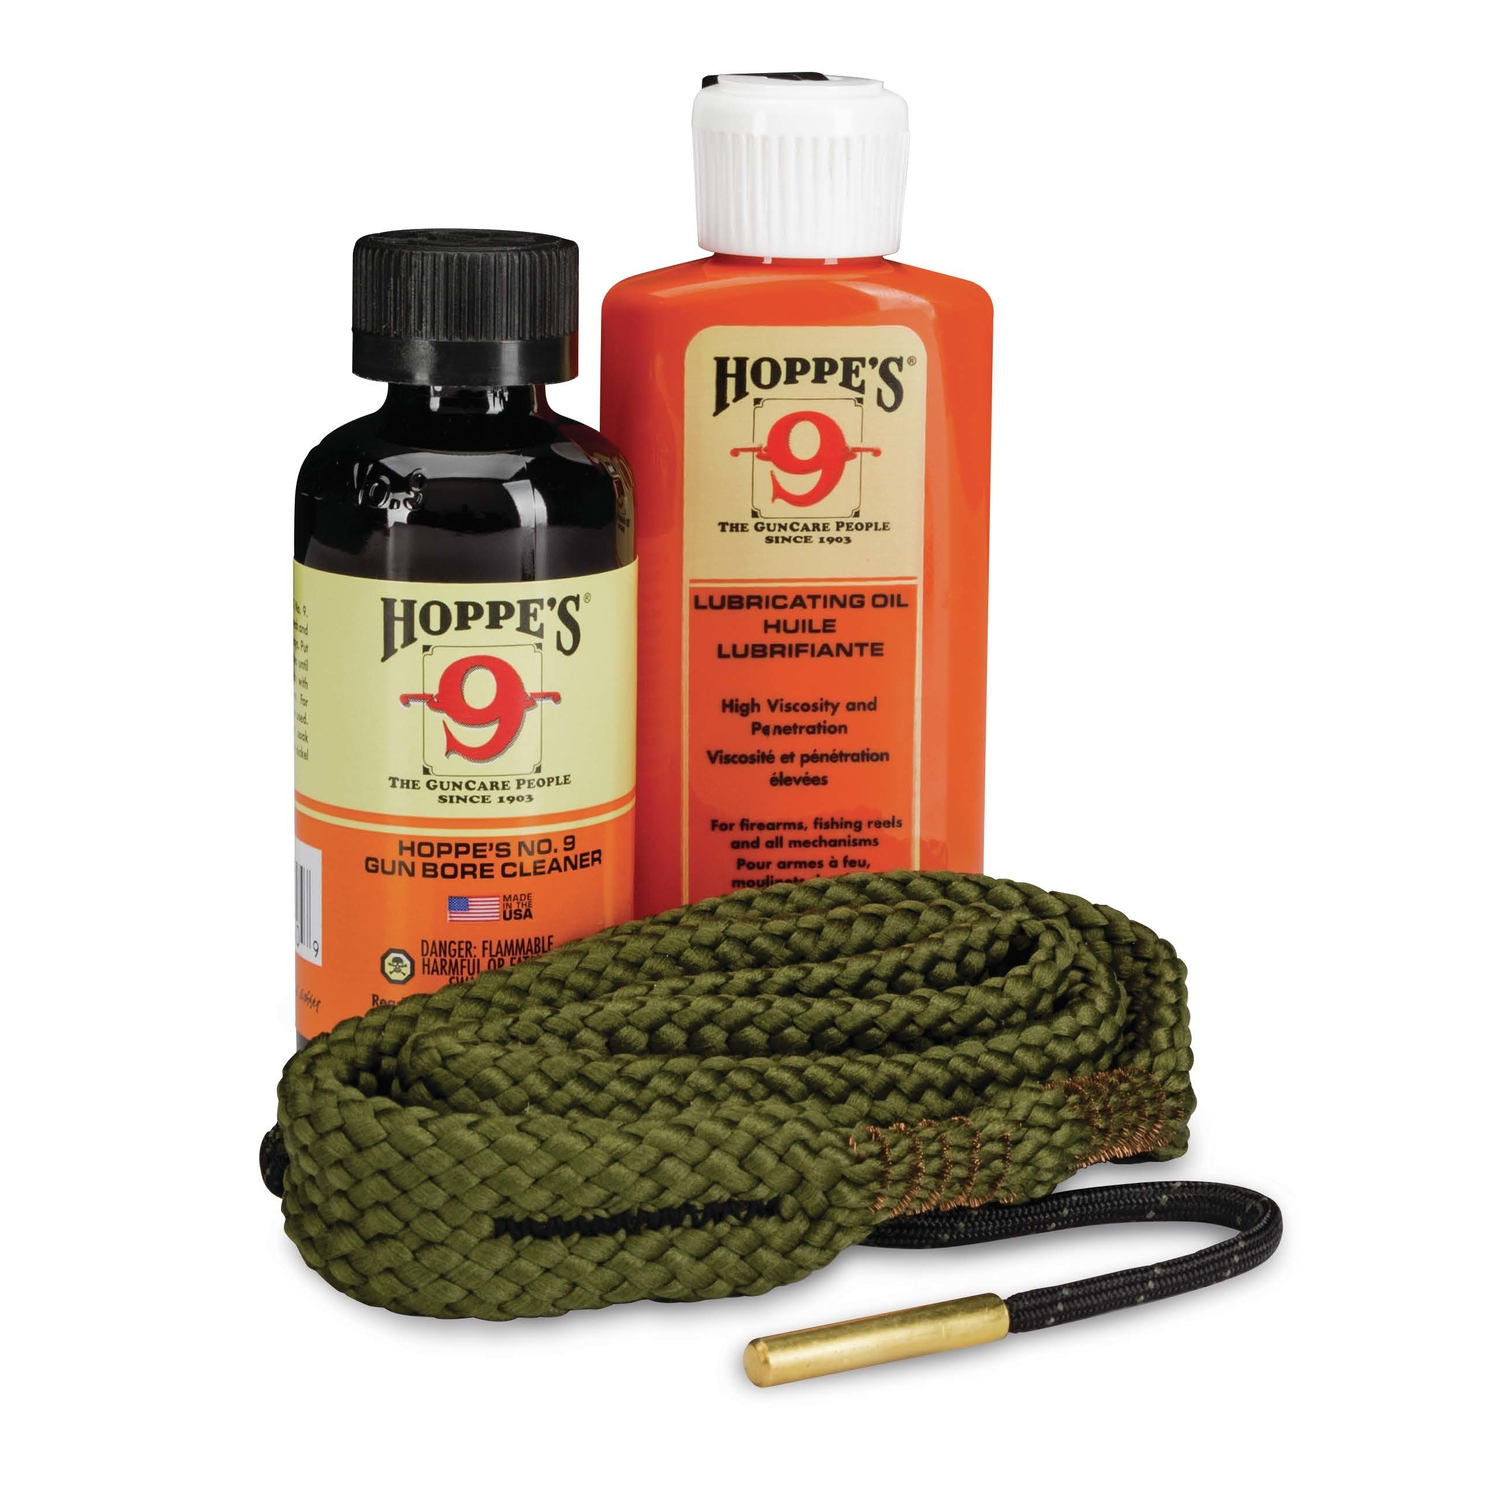 Photos - Other sporting goods Hoppes Hoppe's No. 9 1-2-3 Done Shotgun Gun Cleaning Kit 3 pc 110020 